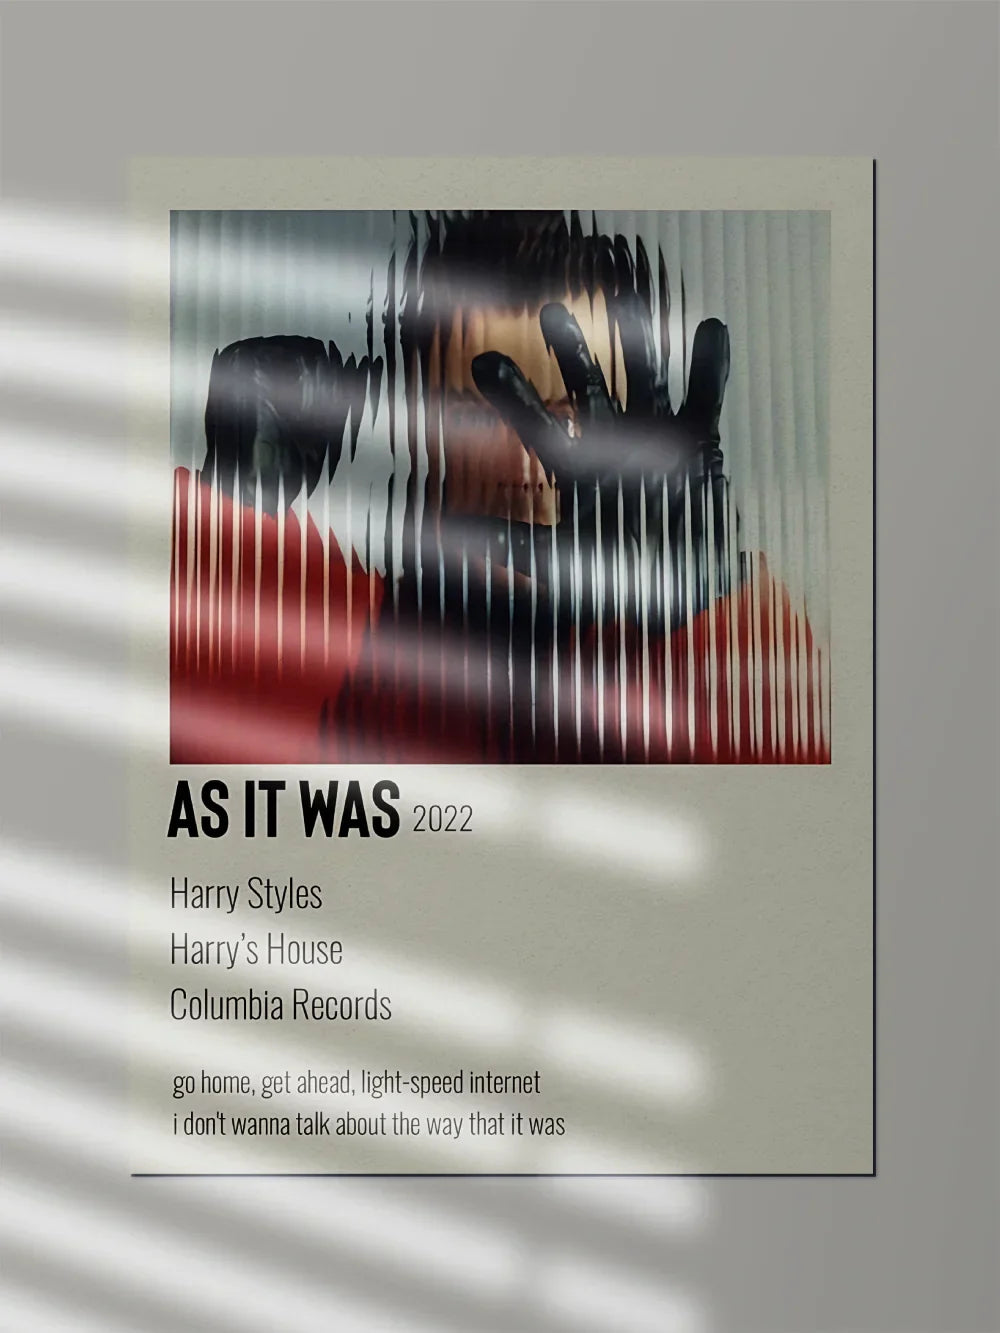 As It Was 2022 x Harry Styles | Music Poster